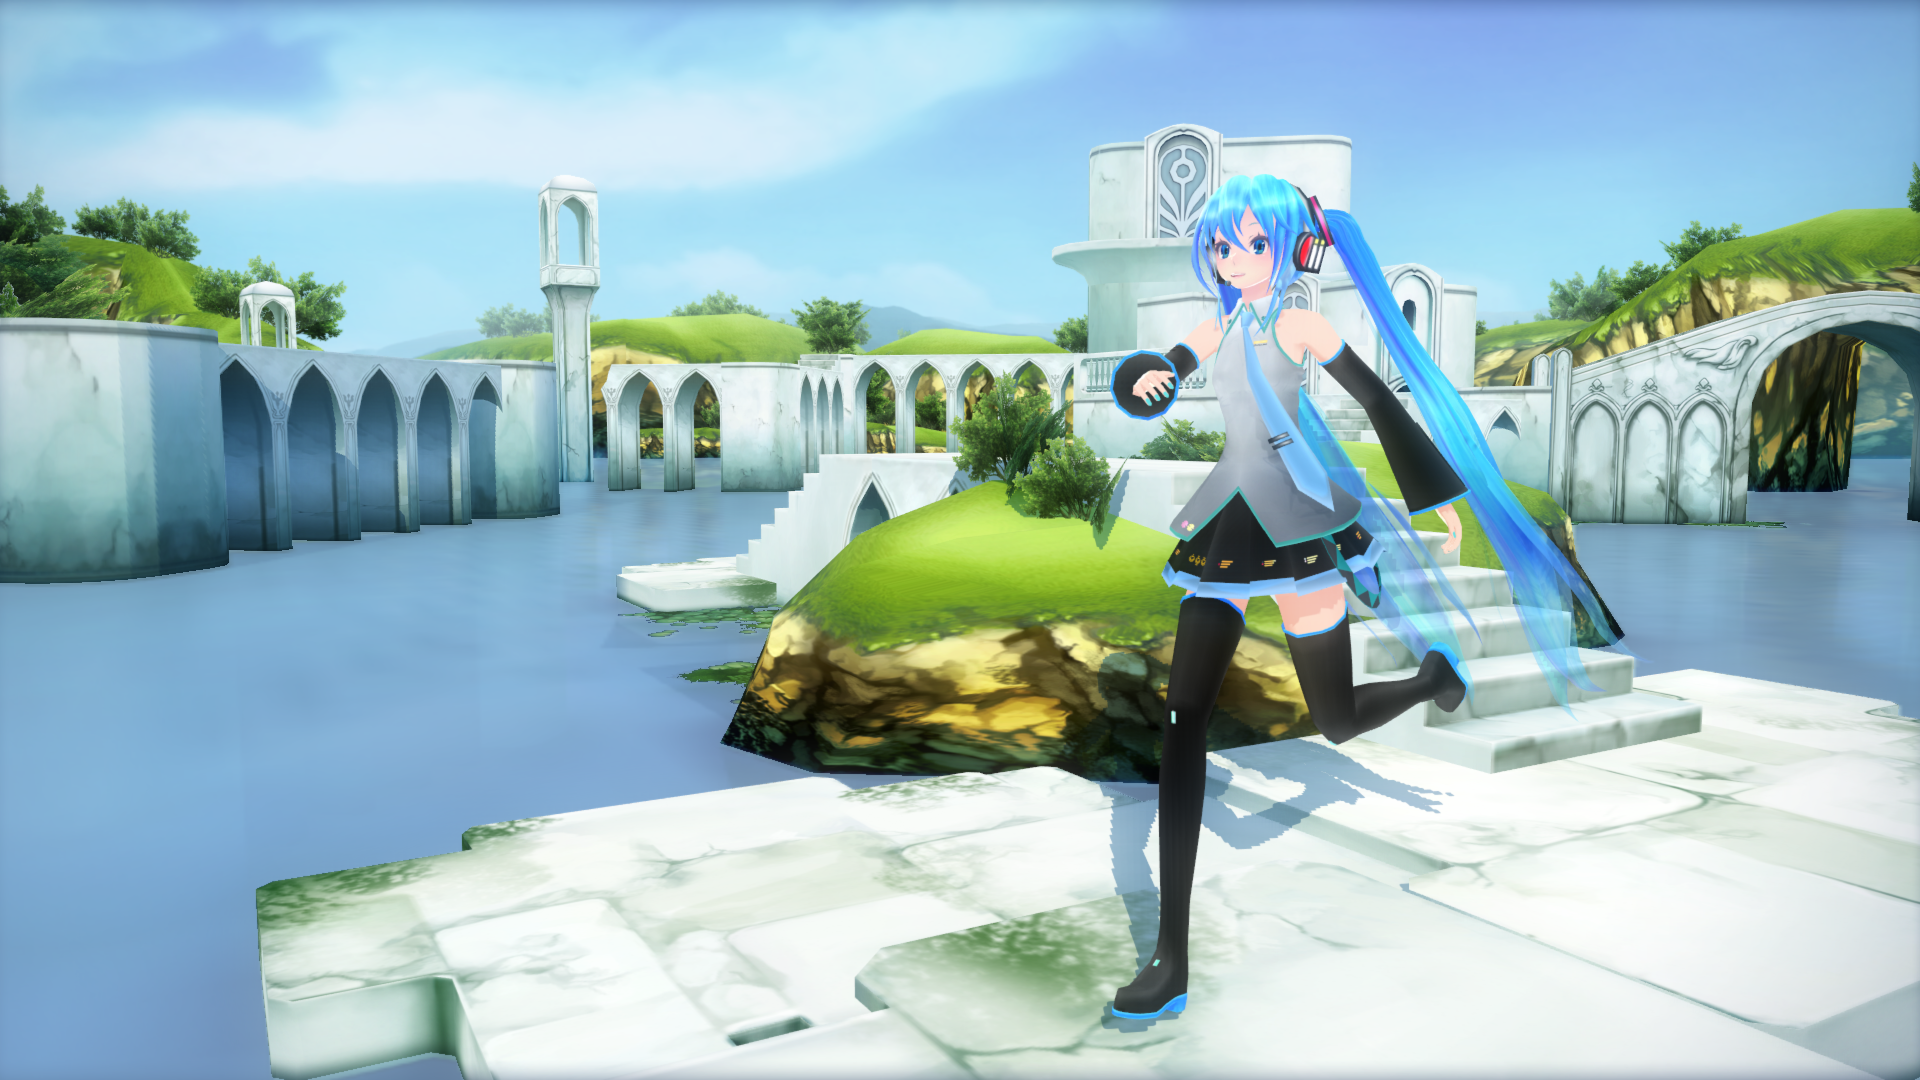 Hatsune Miku TDA -Traditional Outfit: Download